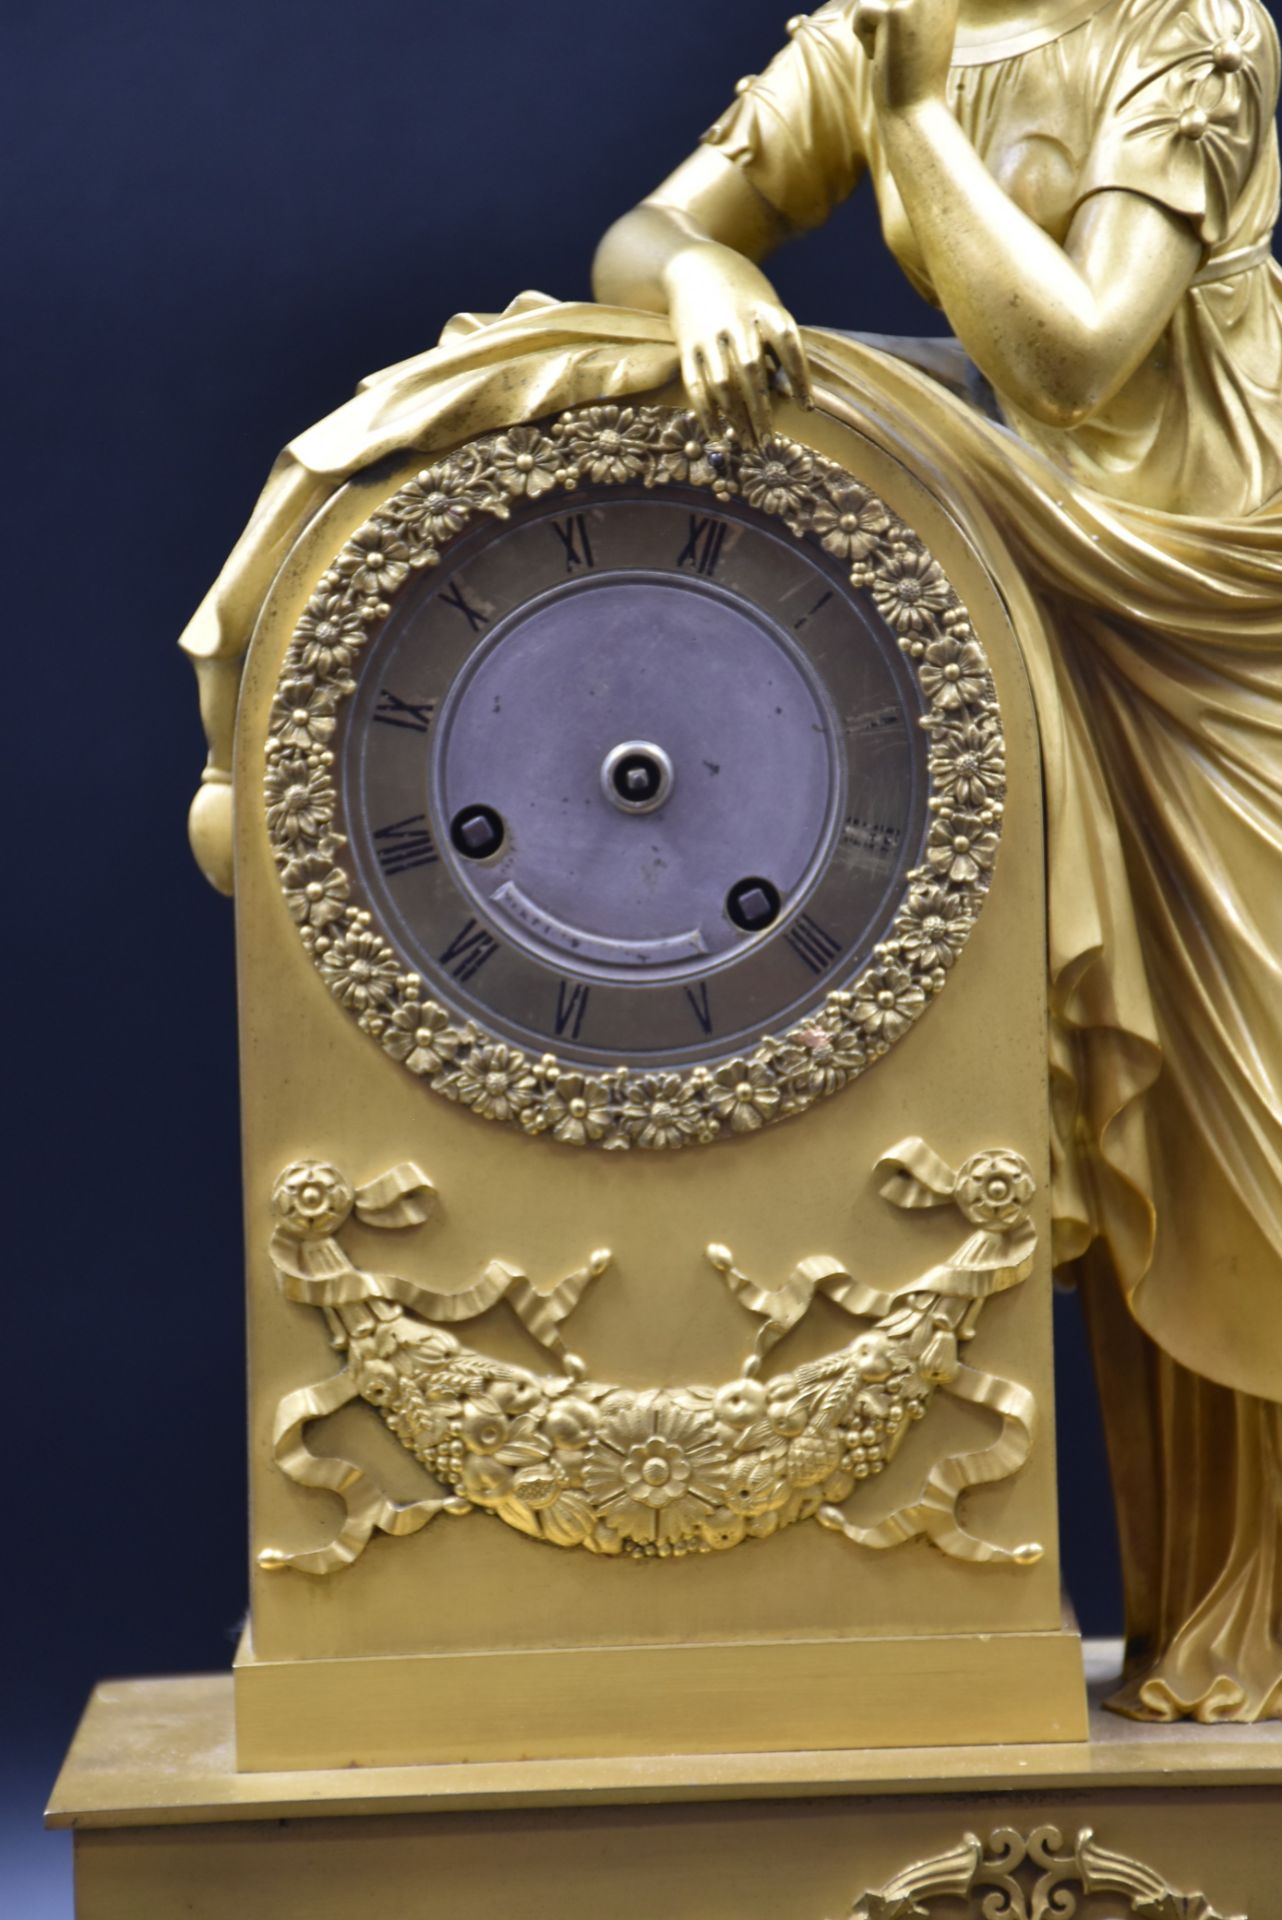 Gilt bronze clock with antique subject. Restoration period. Missing the hands. (No key or - Image 2 of 4